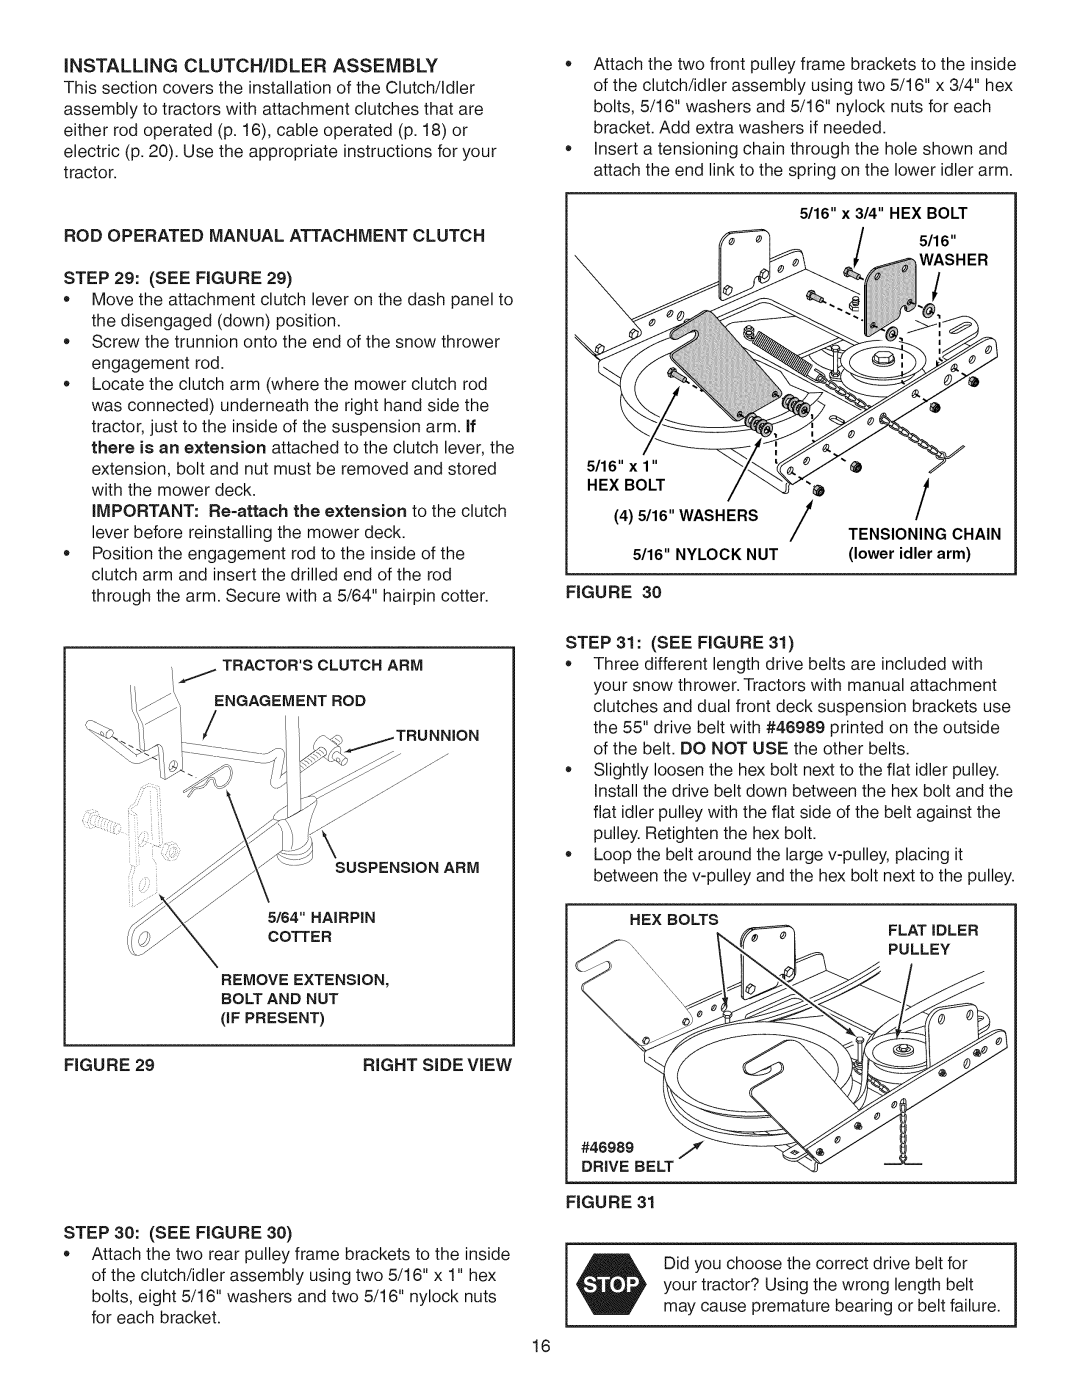 Craftsman 486.24837 manual iNSTALLiNG CLUTCH/IDLER ASSEMBLY, See Figure, Engagement Rod, Suspension Arm, 5116x 3/4 HEX BOLT 